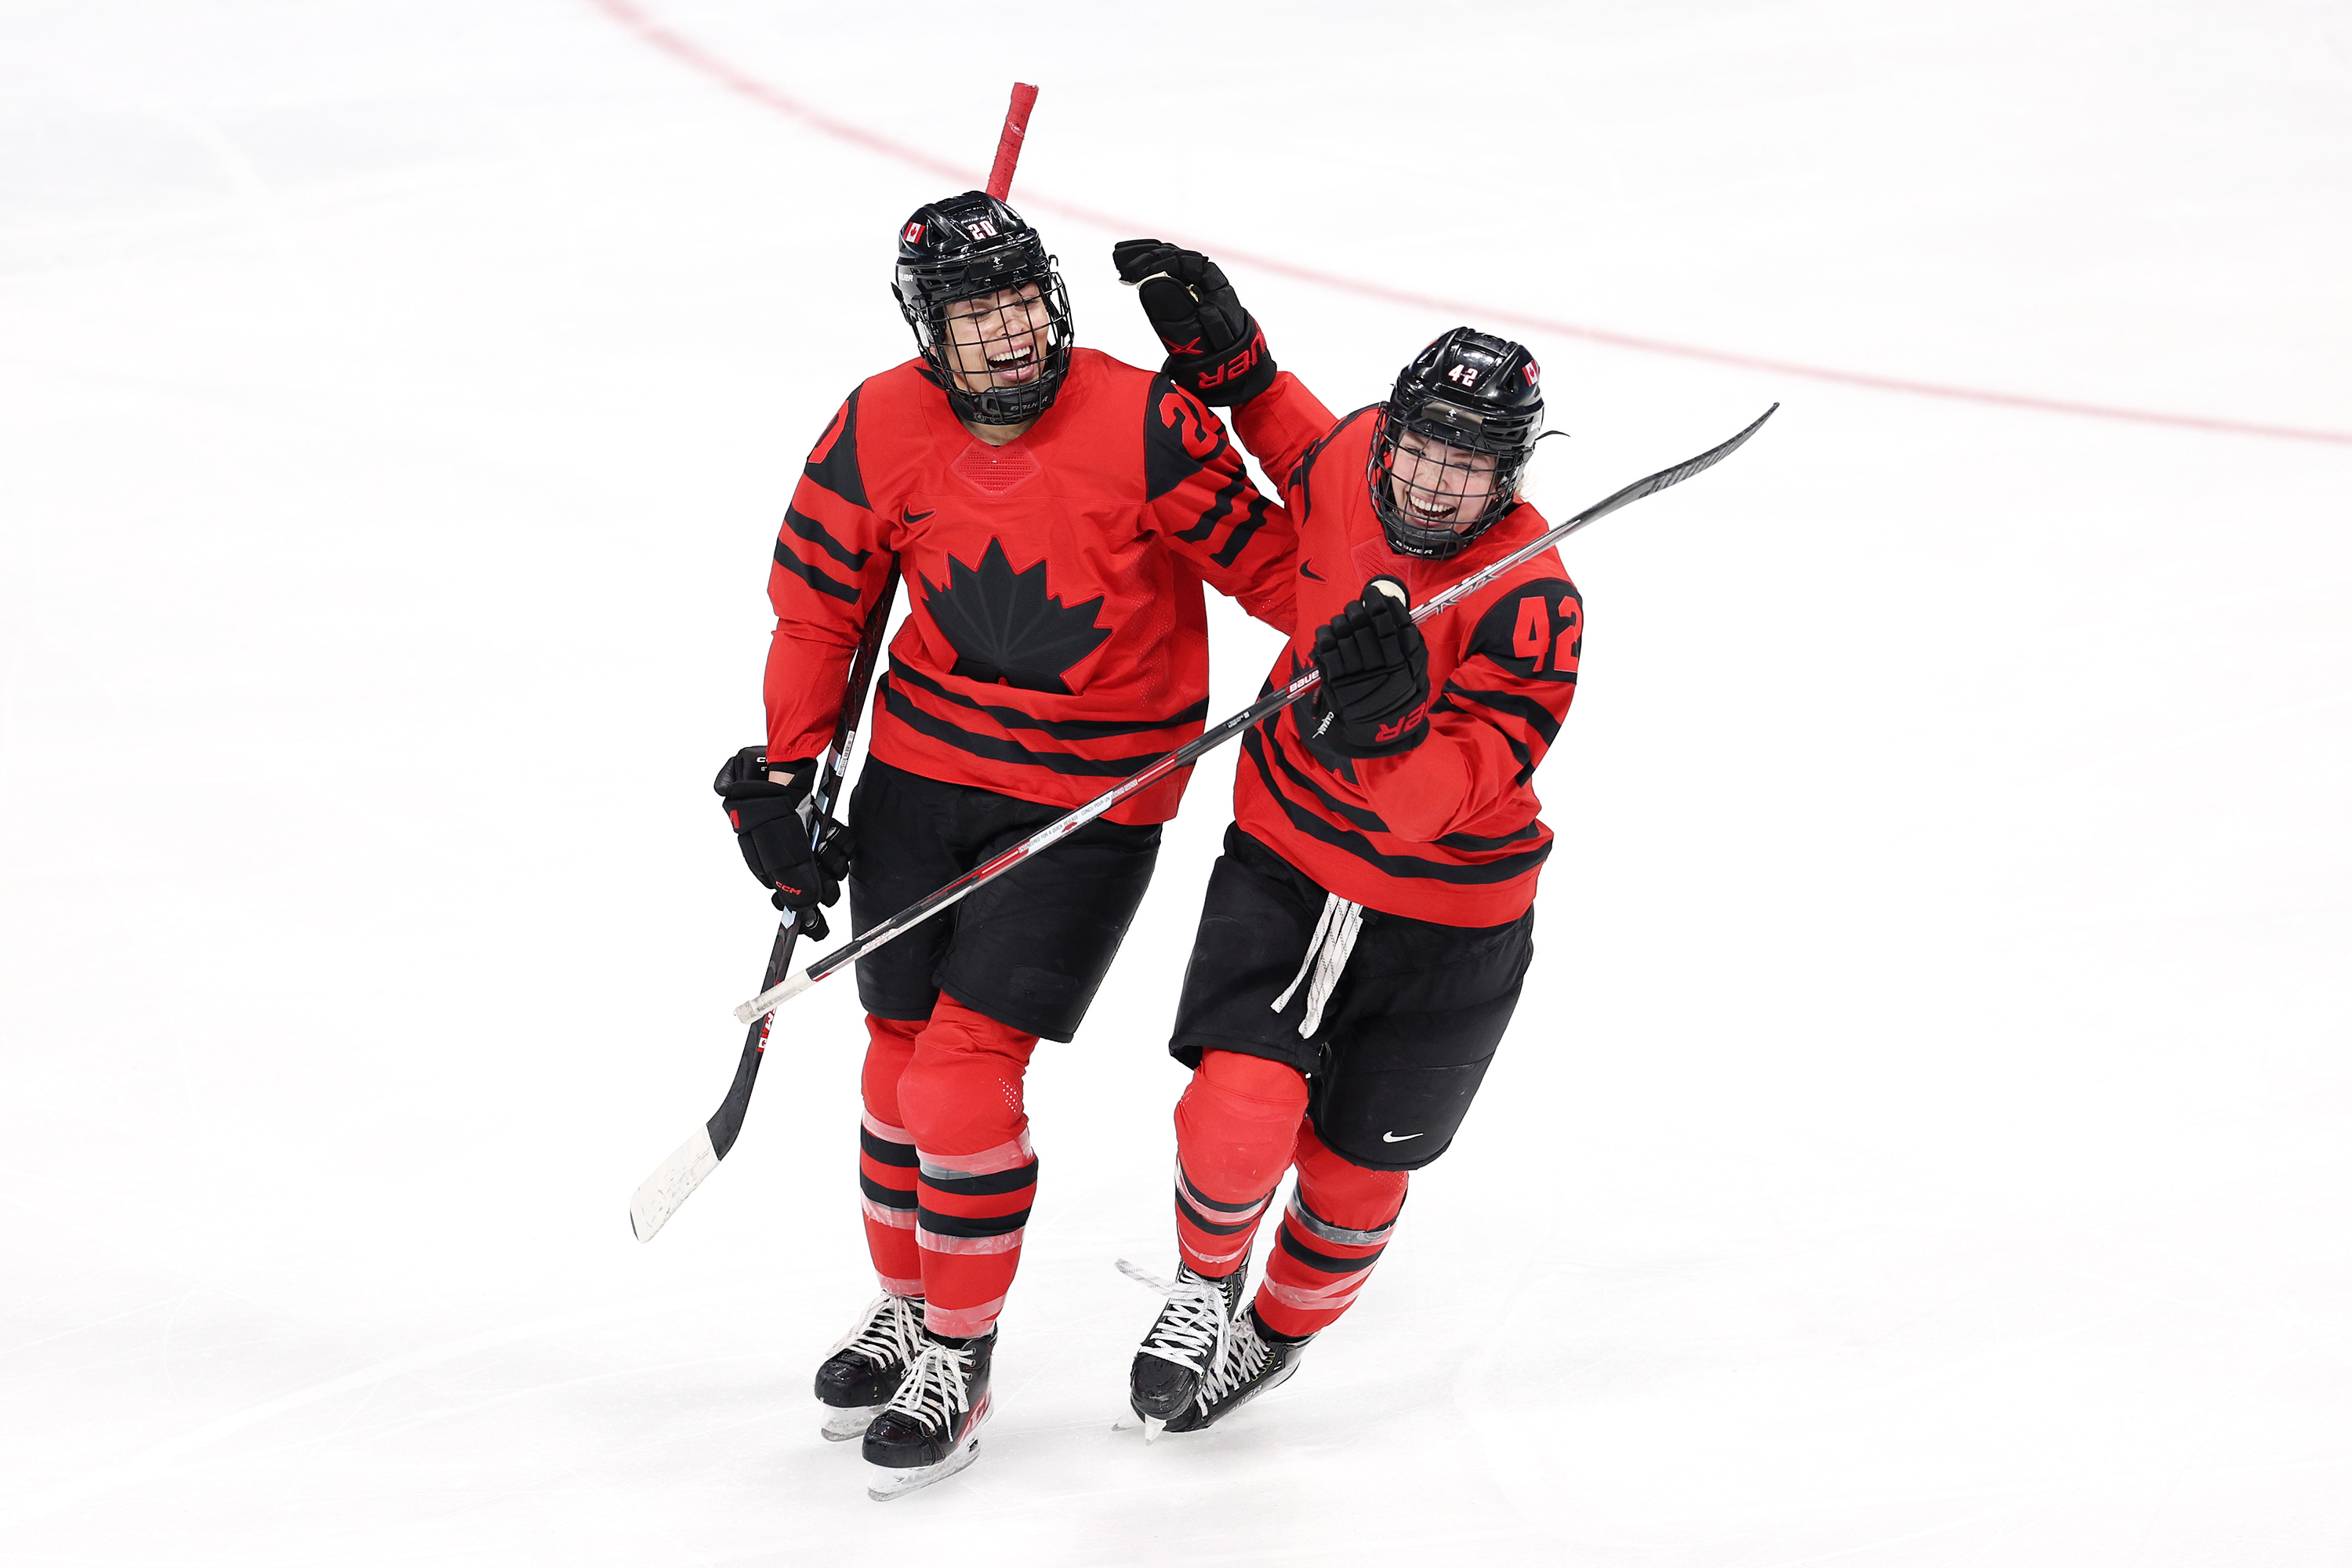 Team Canada's Sarah Nurse #20 celebrates with Claire Thompson #42 after scoring a goal in the first period during the women's ice hockey gold medal match between Team Canada and Team USA on Thursday.